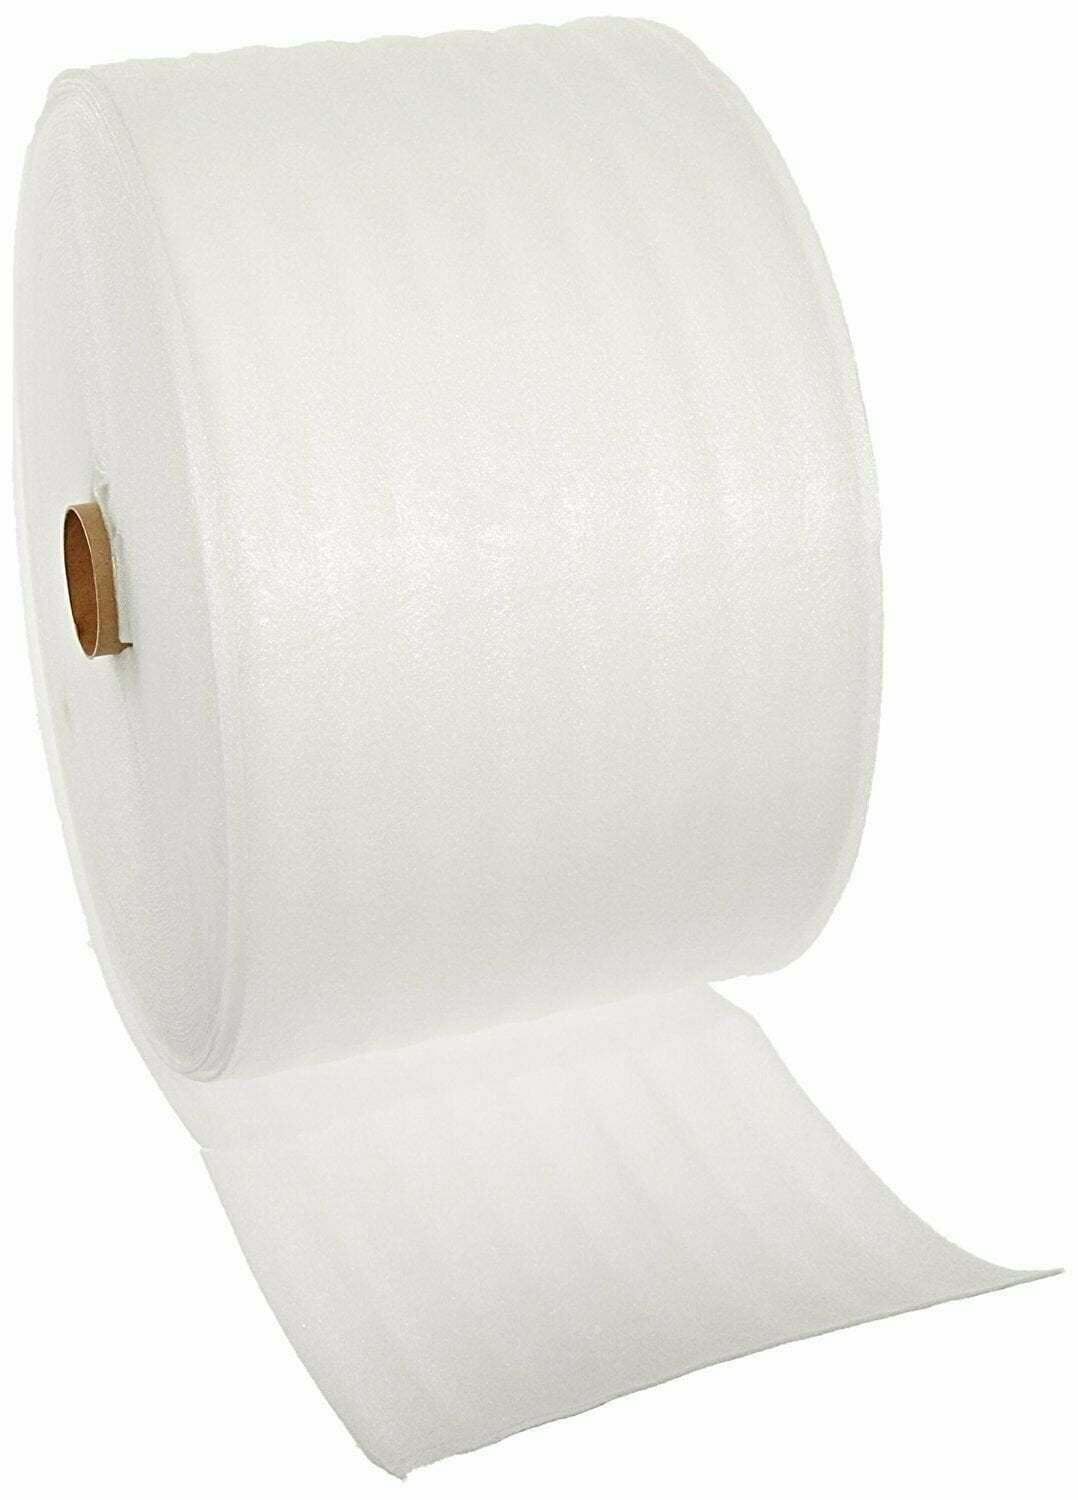 Pen+Gear 24 in x 24 in White Packing Paper for Moving & Shipping, 220 Sheets,  7.22 lb 